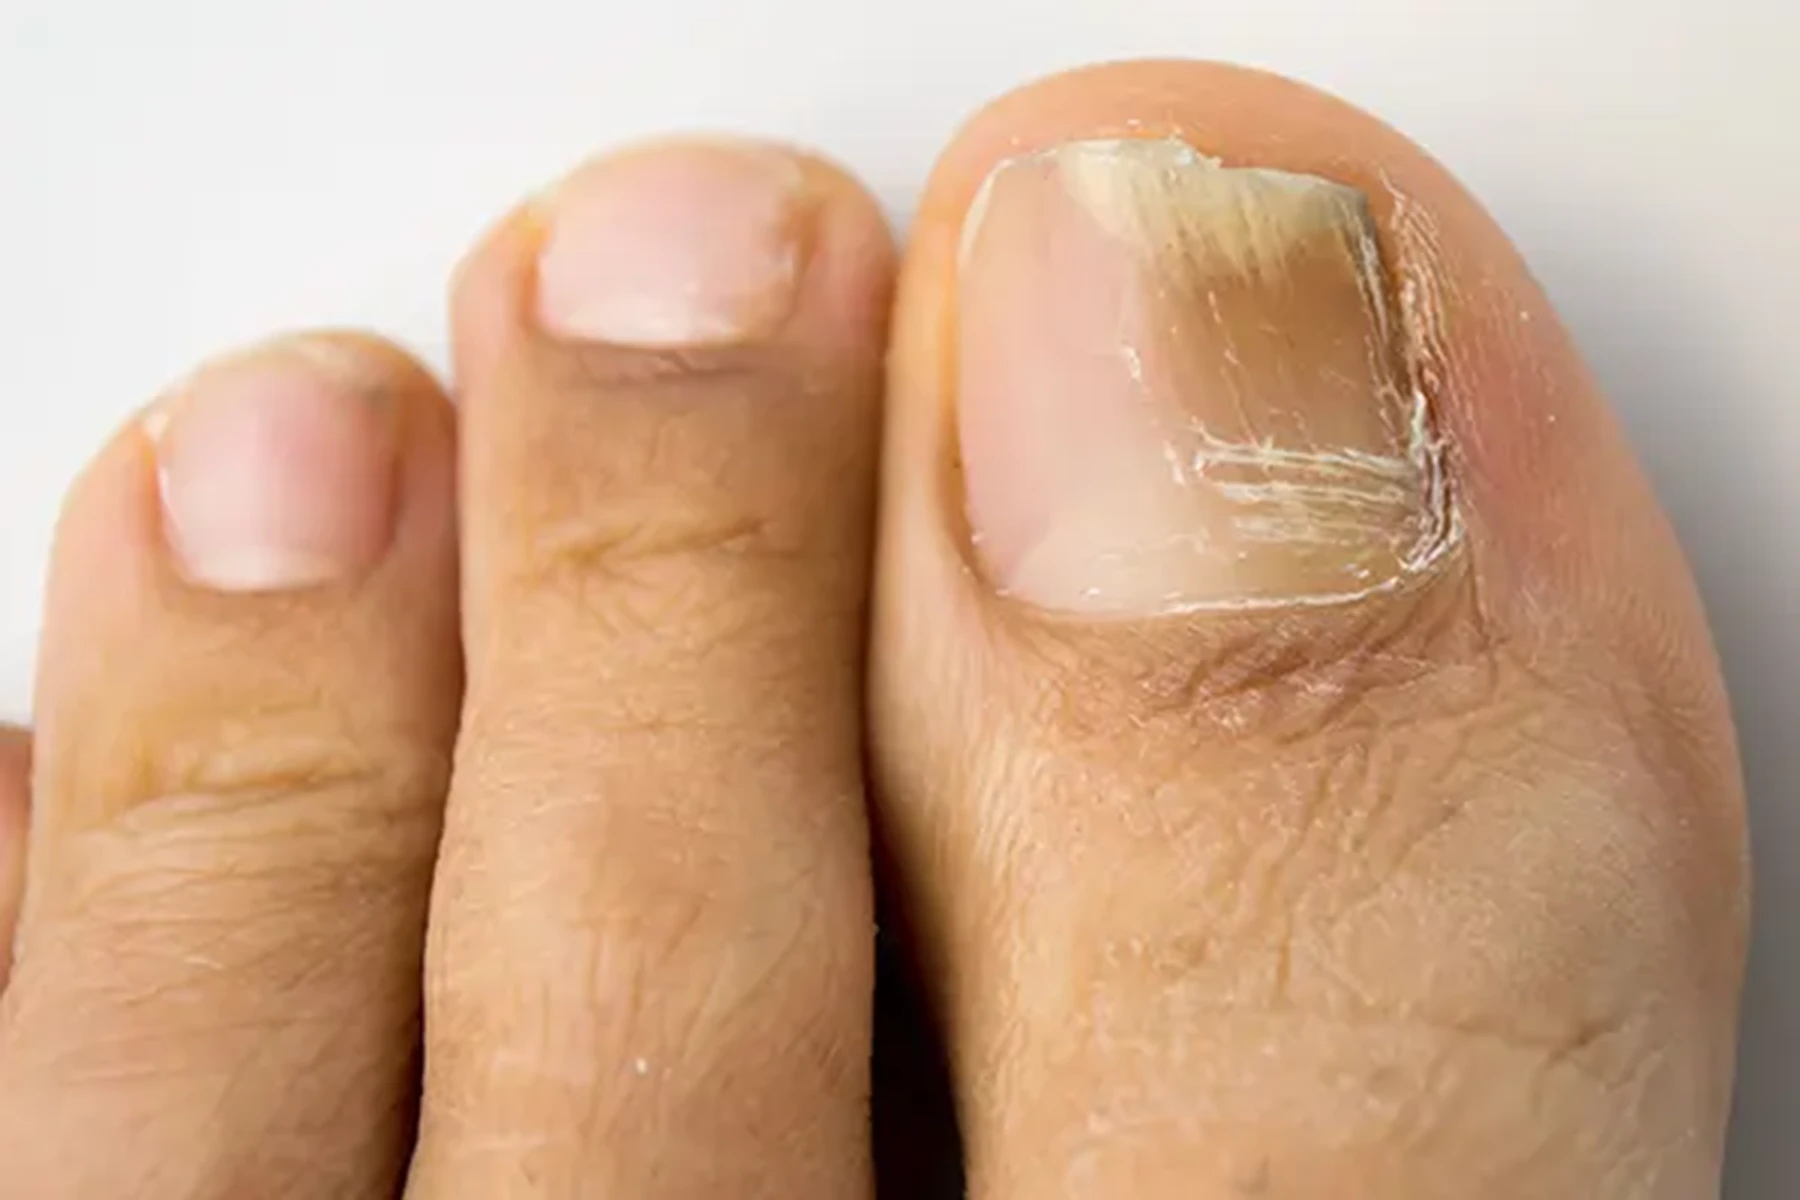 7 Things Your Toes Could Say About Your Health